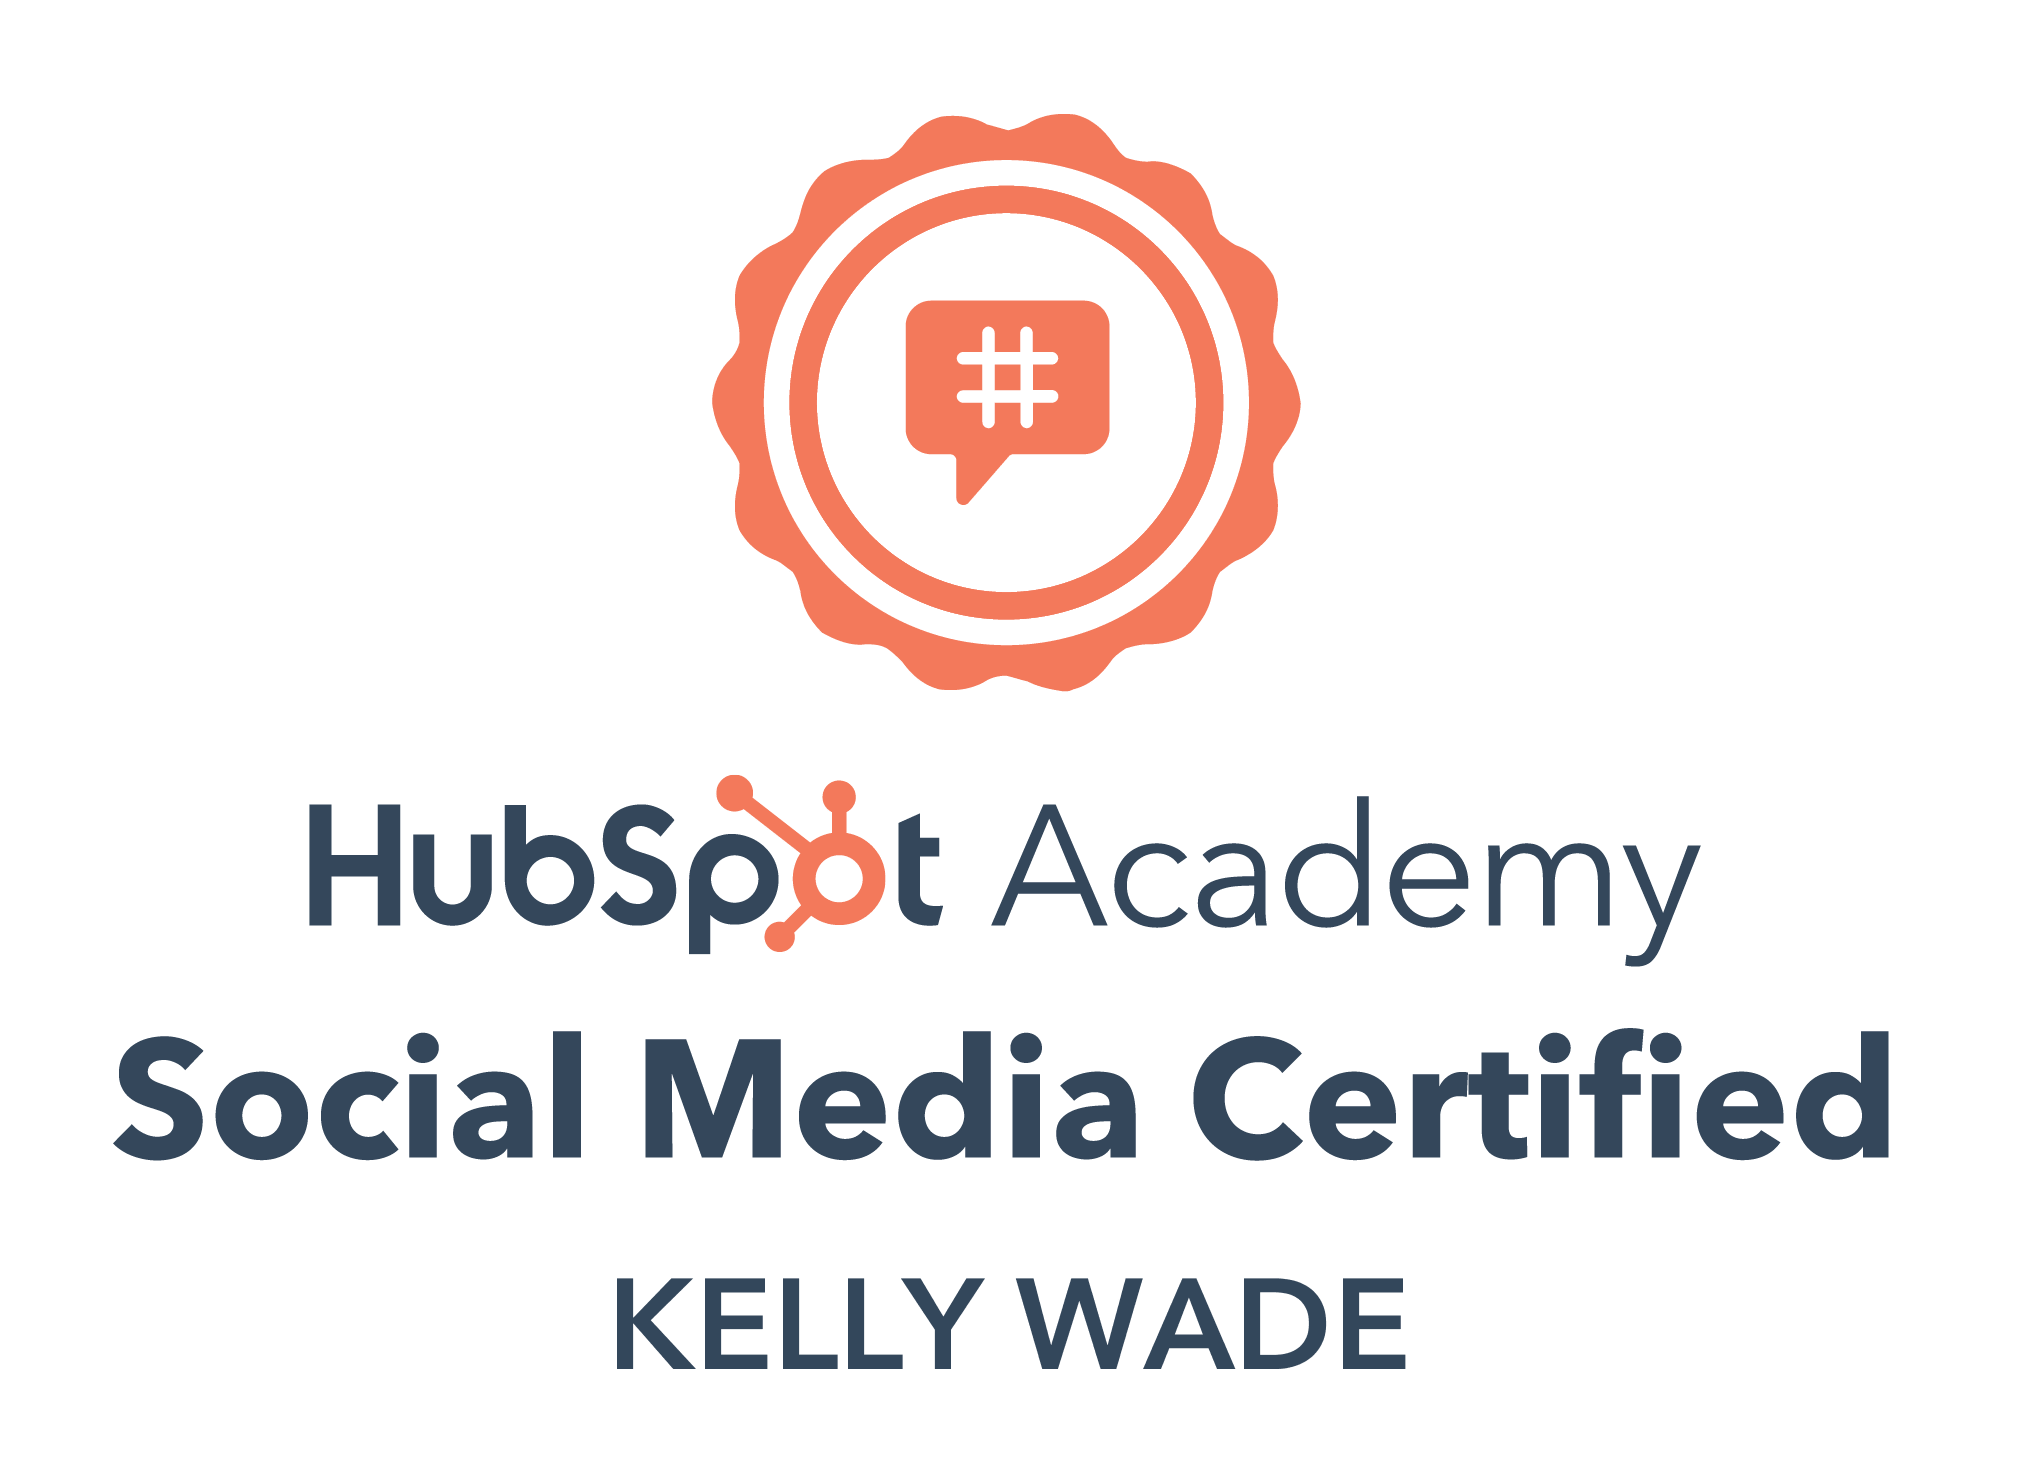 Certificate that proves Kelly has passed the HubSpot Academy Social Media certification